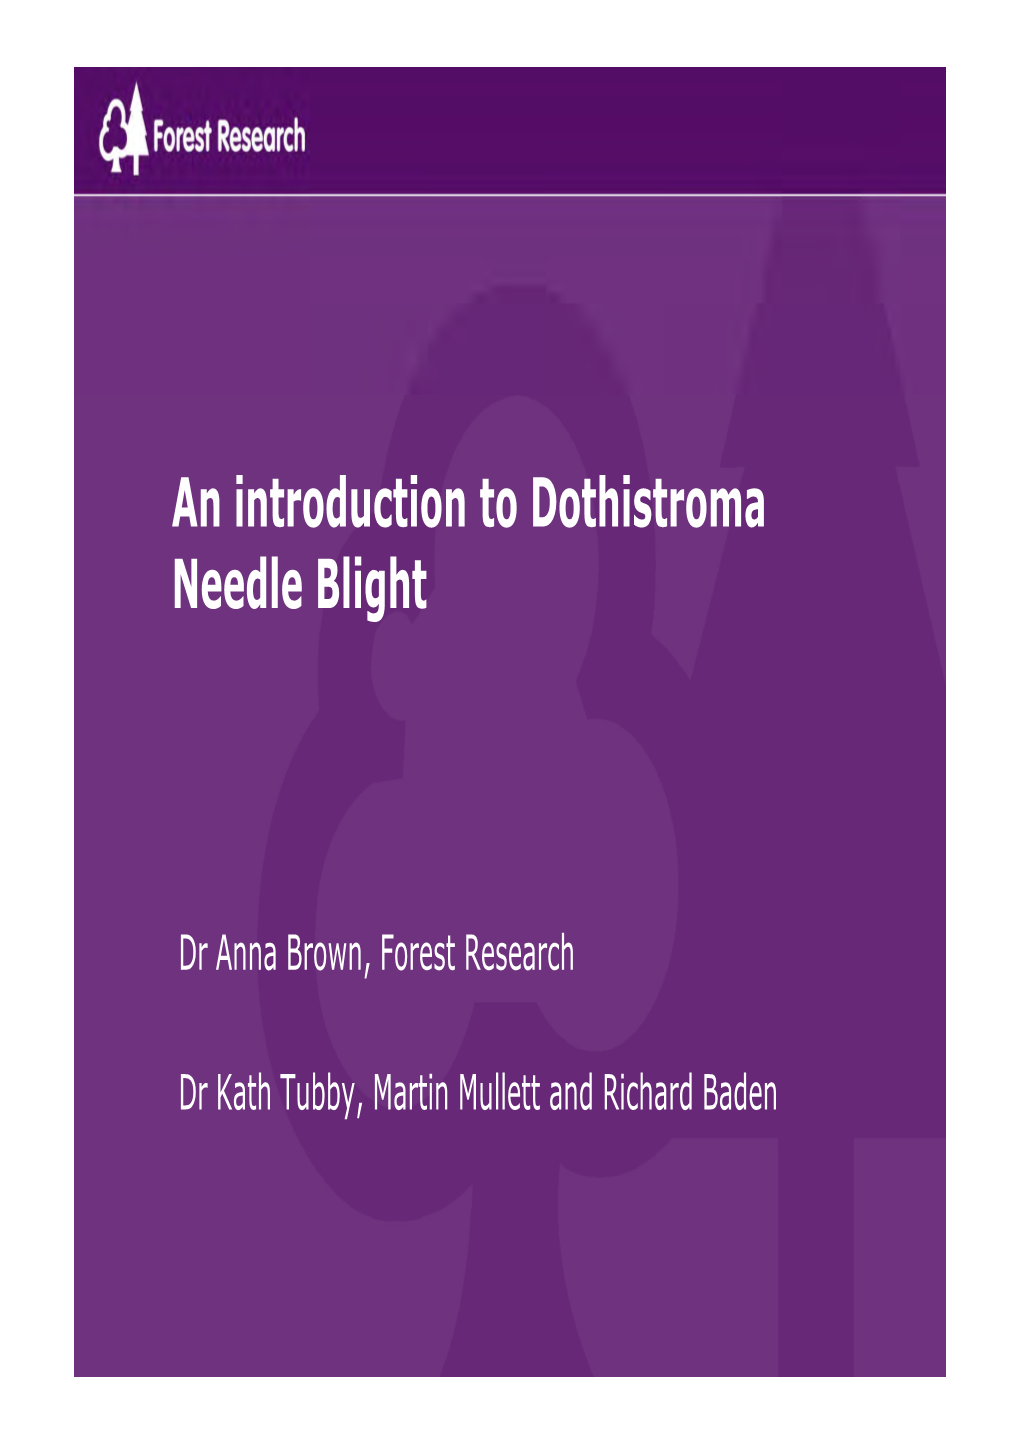 An Introduction to Dothistroma Needle Blight